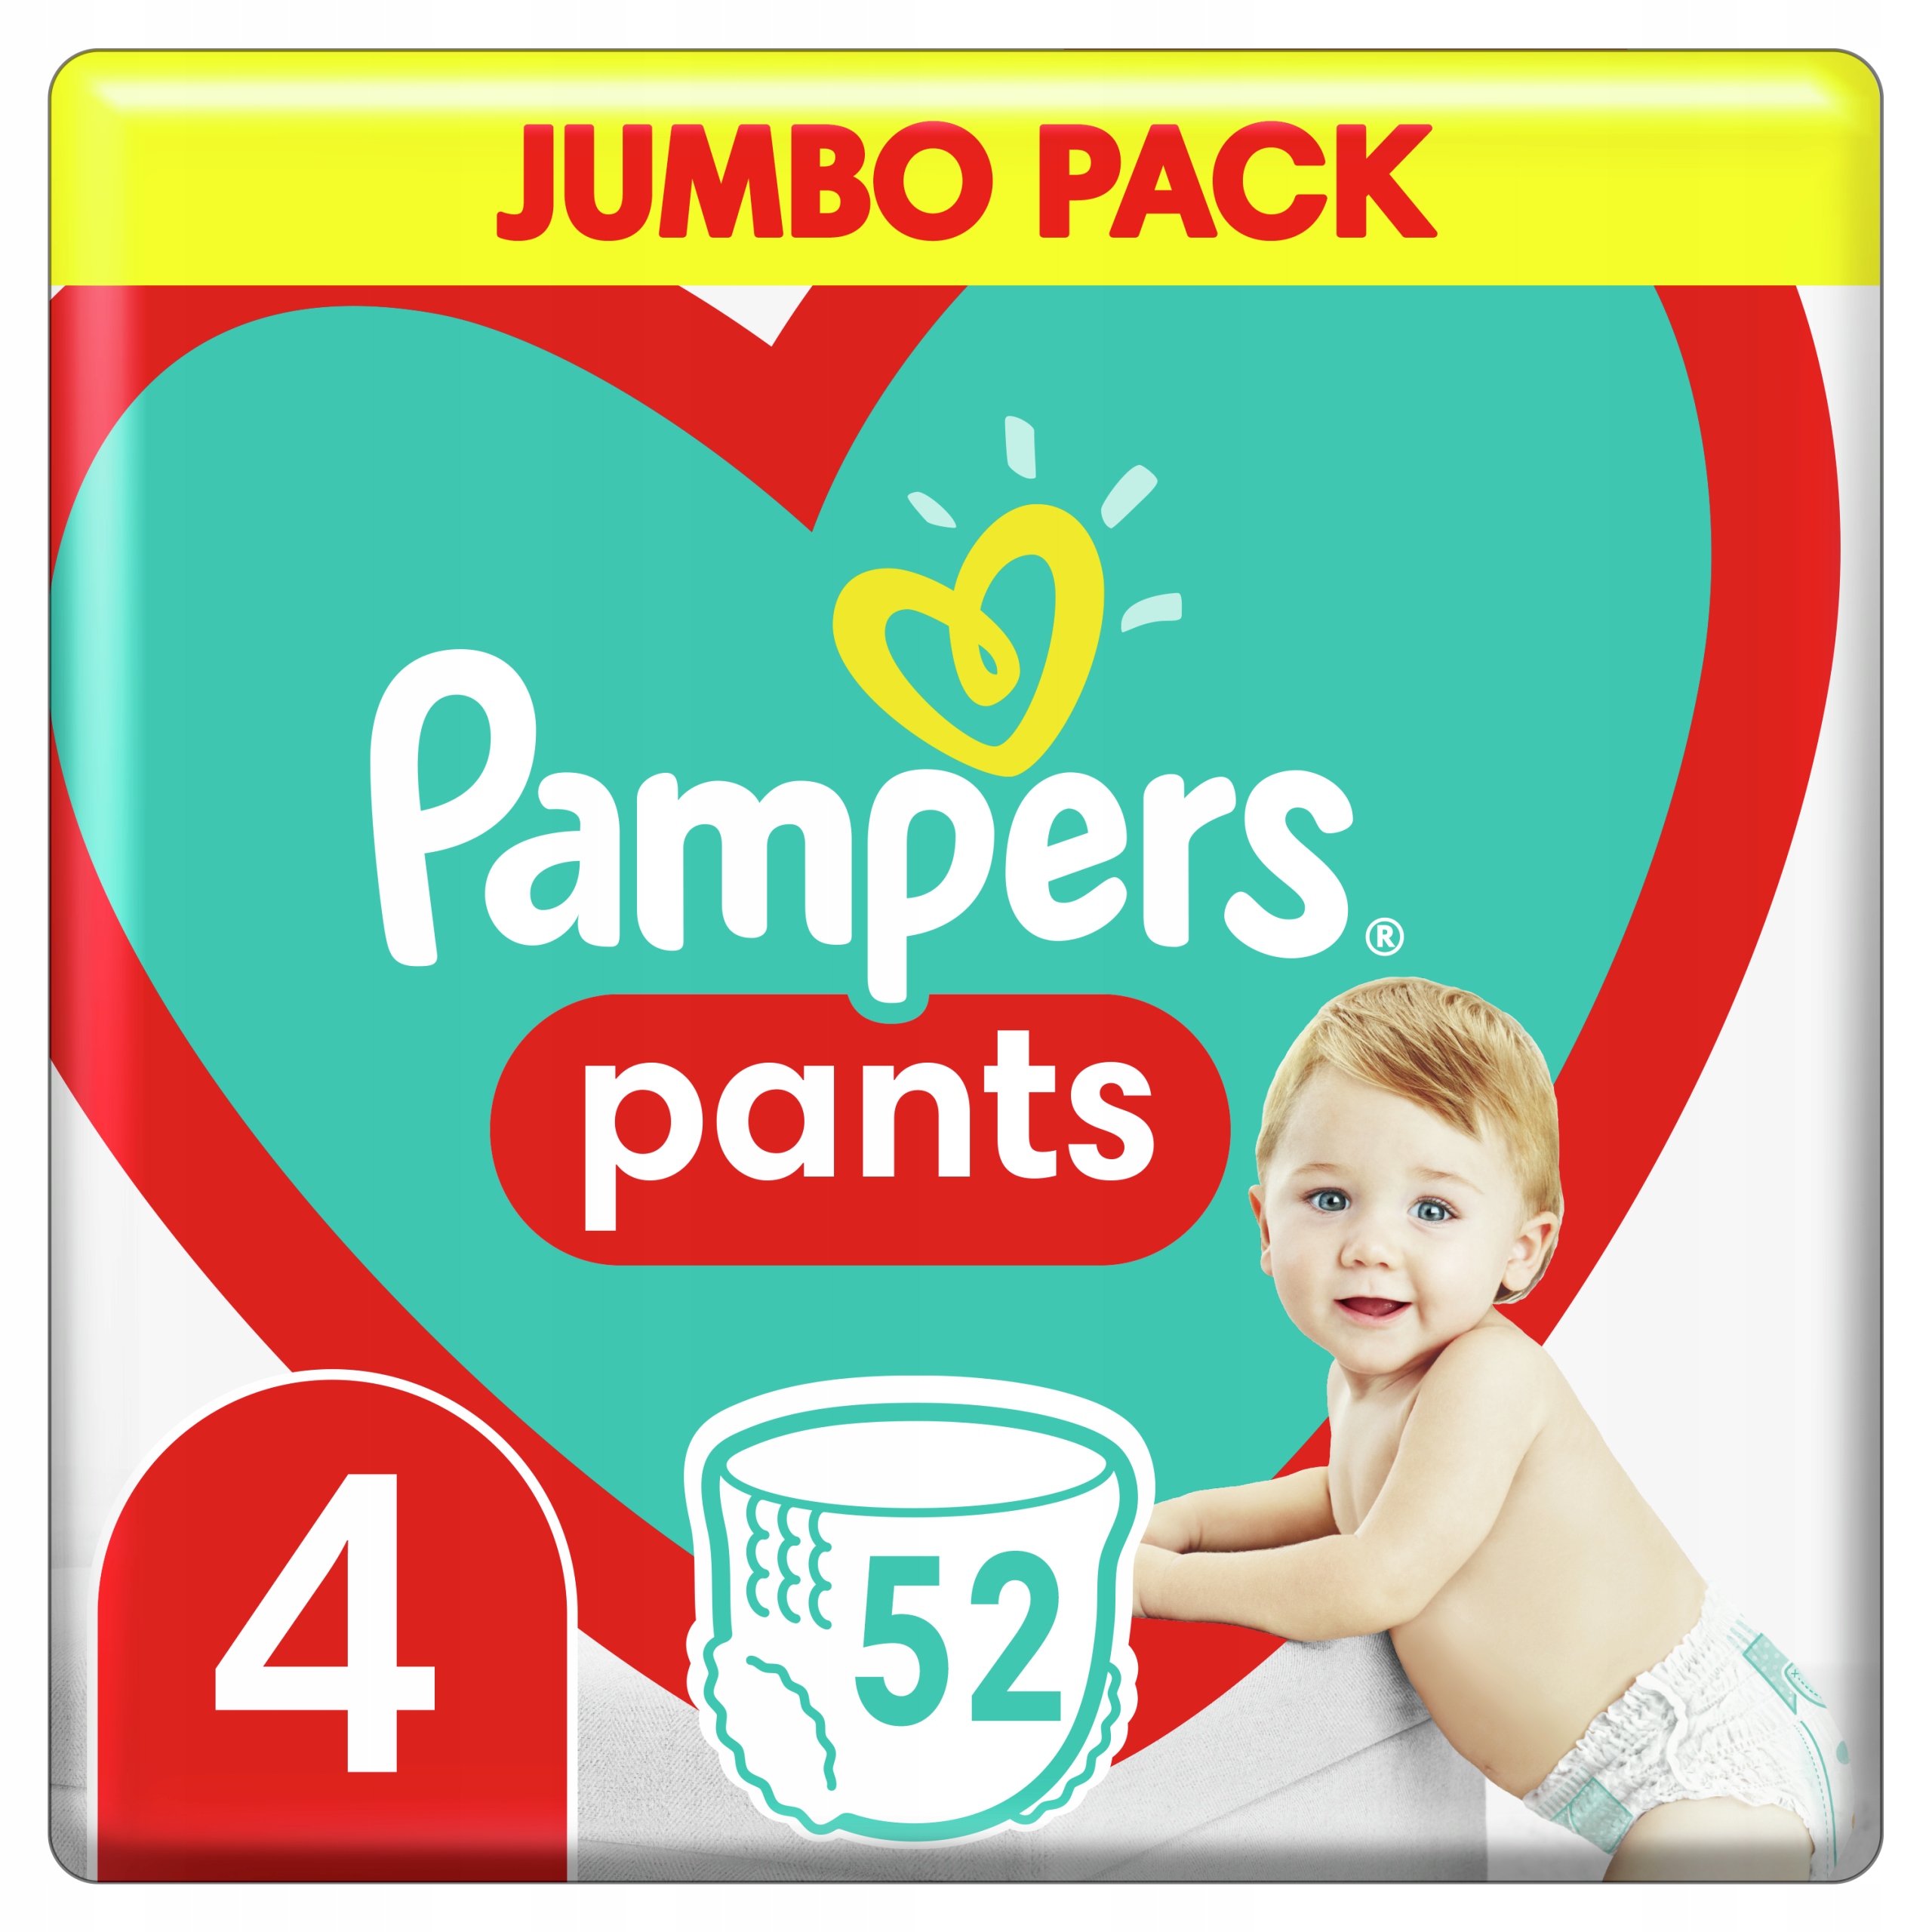 pampers care 1 auchan